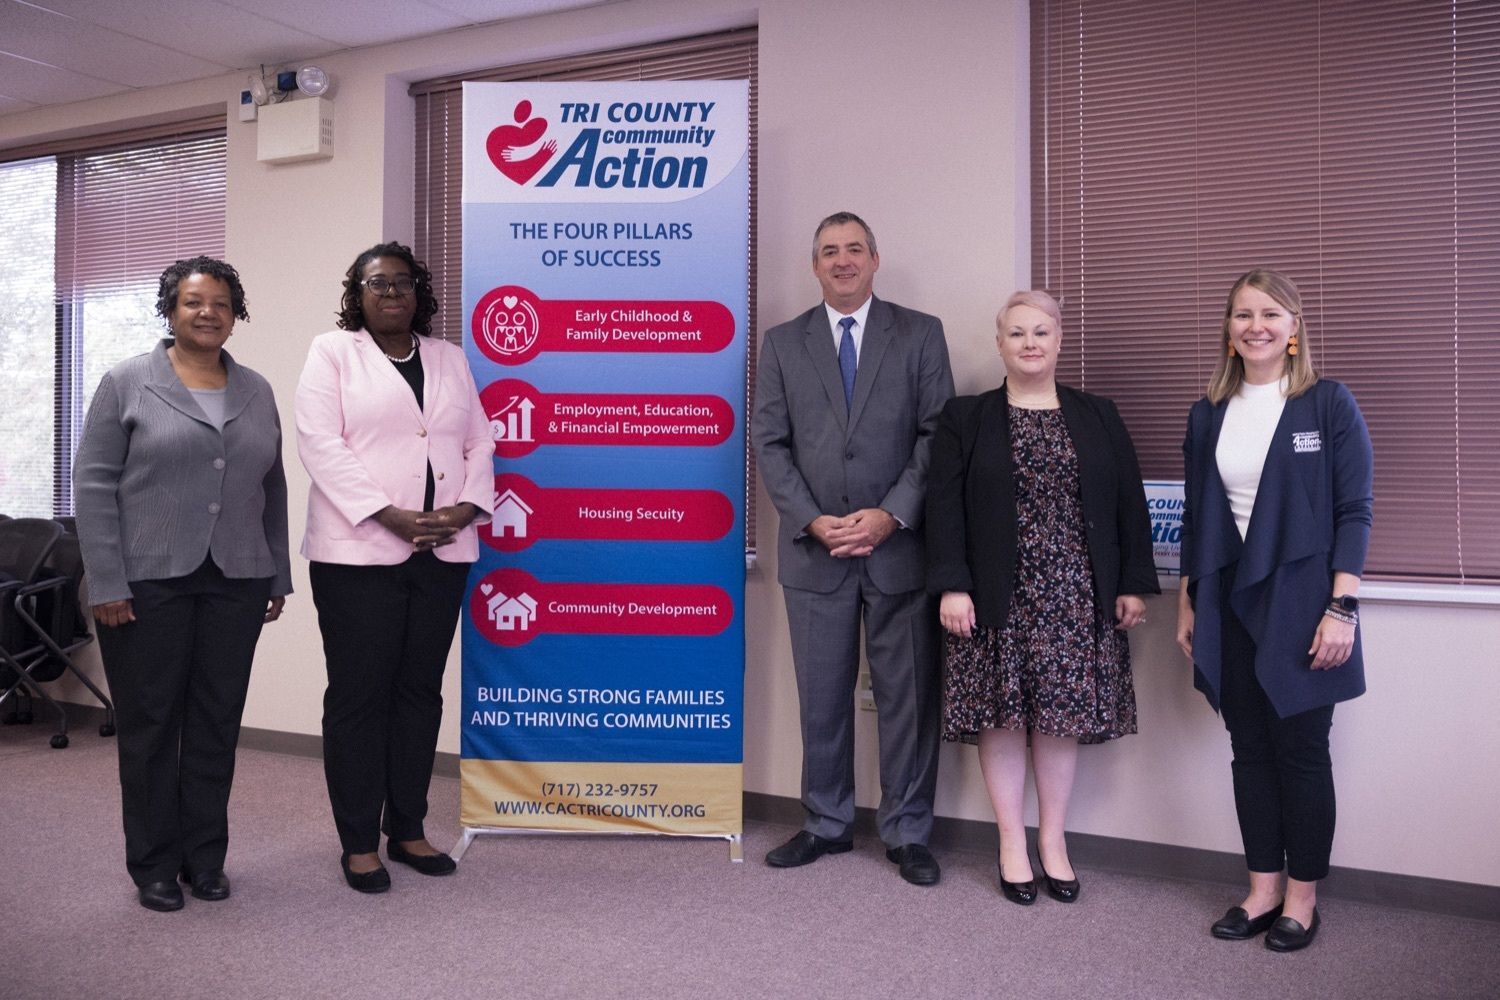 Tri County Community Action hosted The Department of Human Services and the Public Utility Commission to Announce Opening of LIHEAP Season